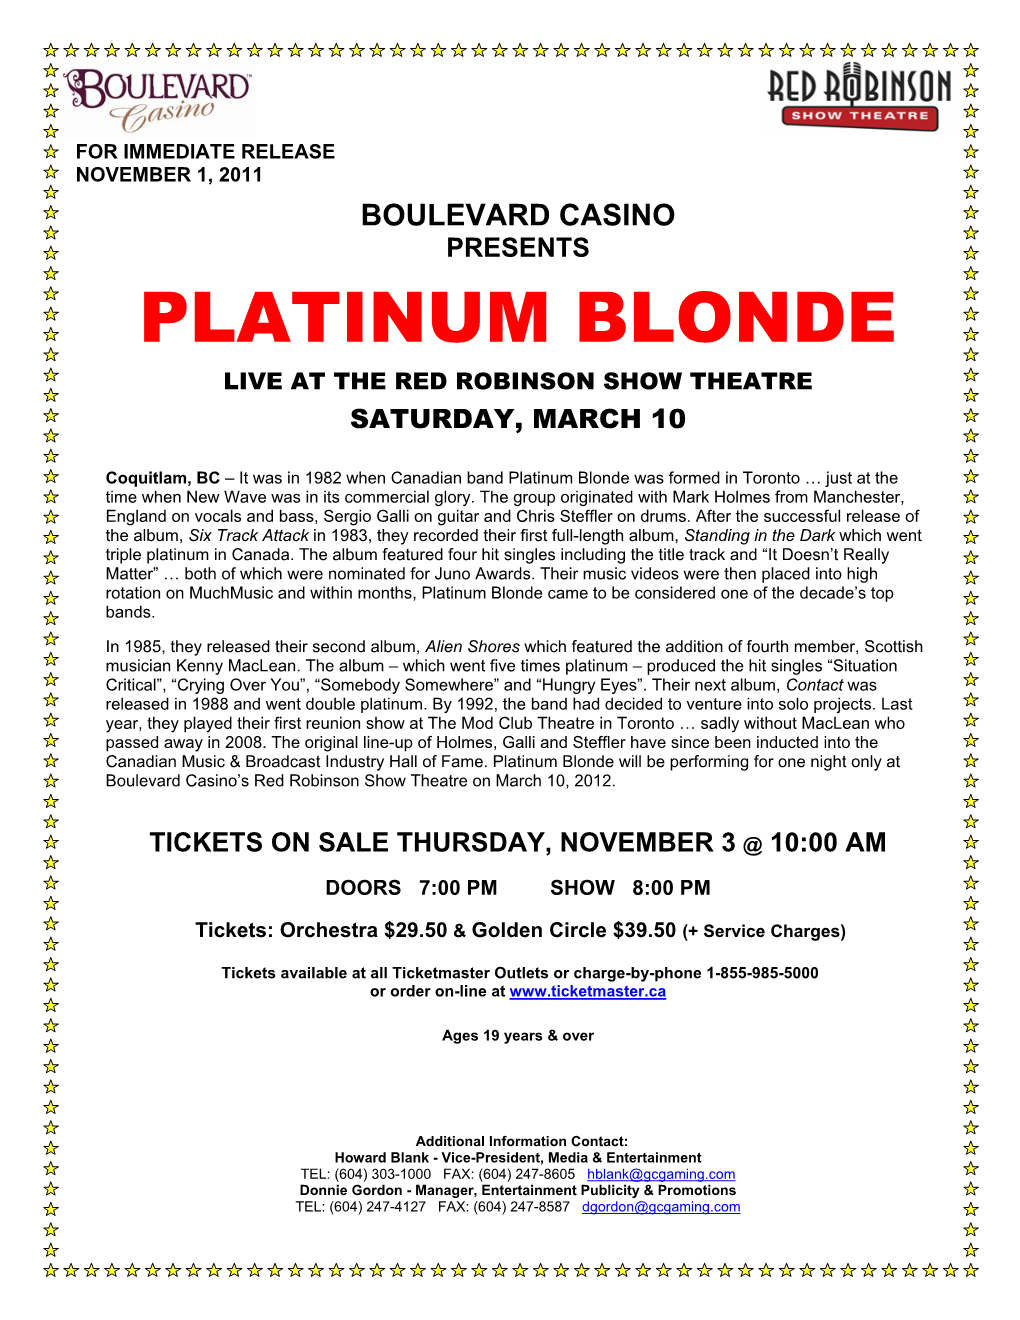 Platinum Blonde Live at the Red Robinson Show Theatre